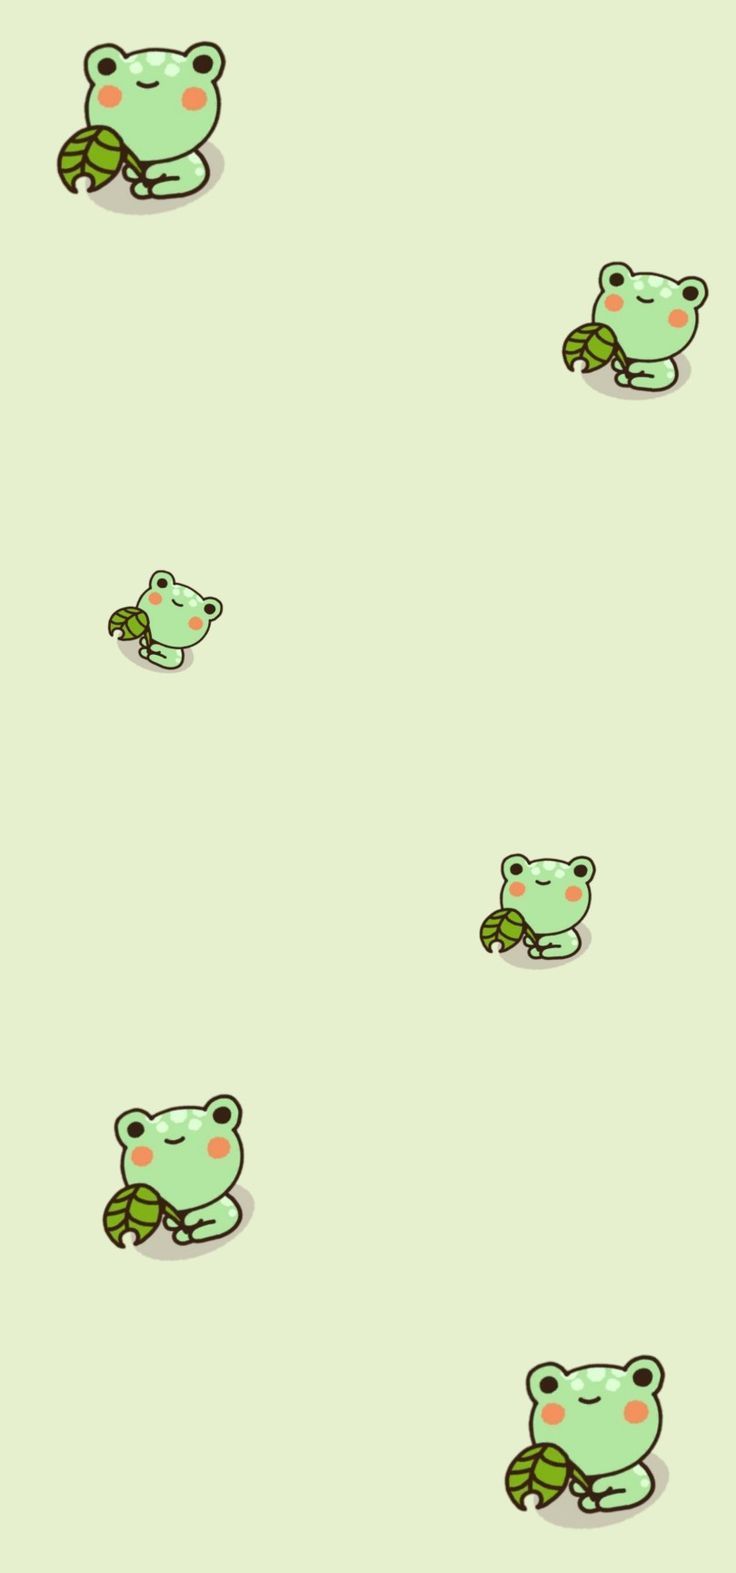 A wallpaper with cute frogs on it - Lime green